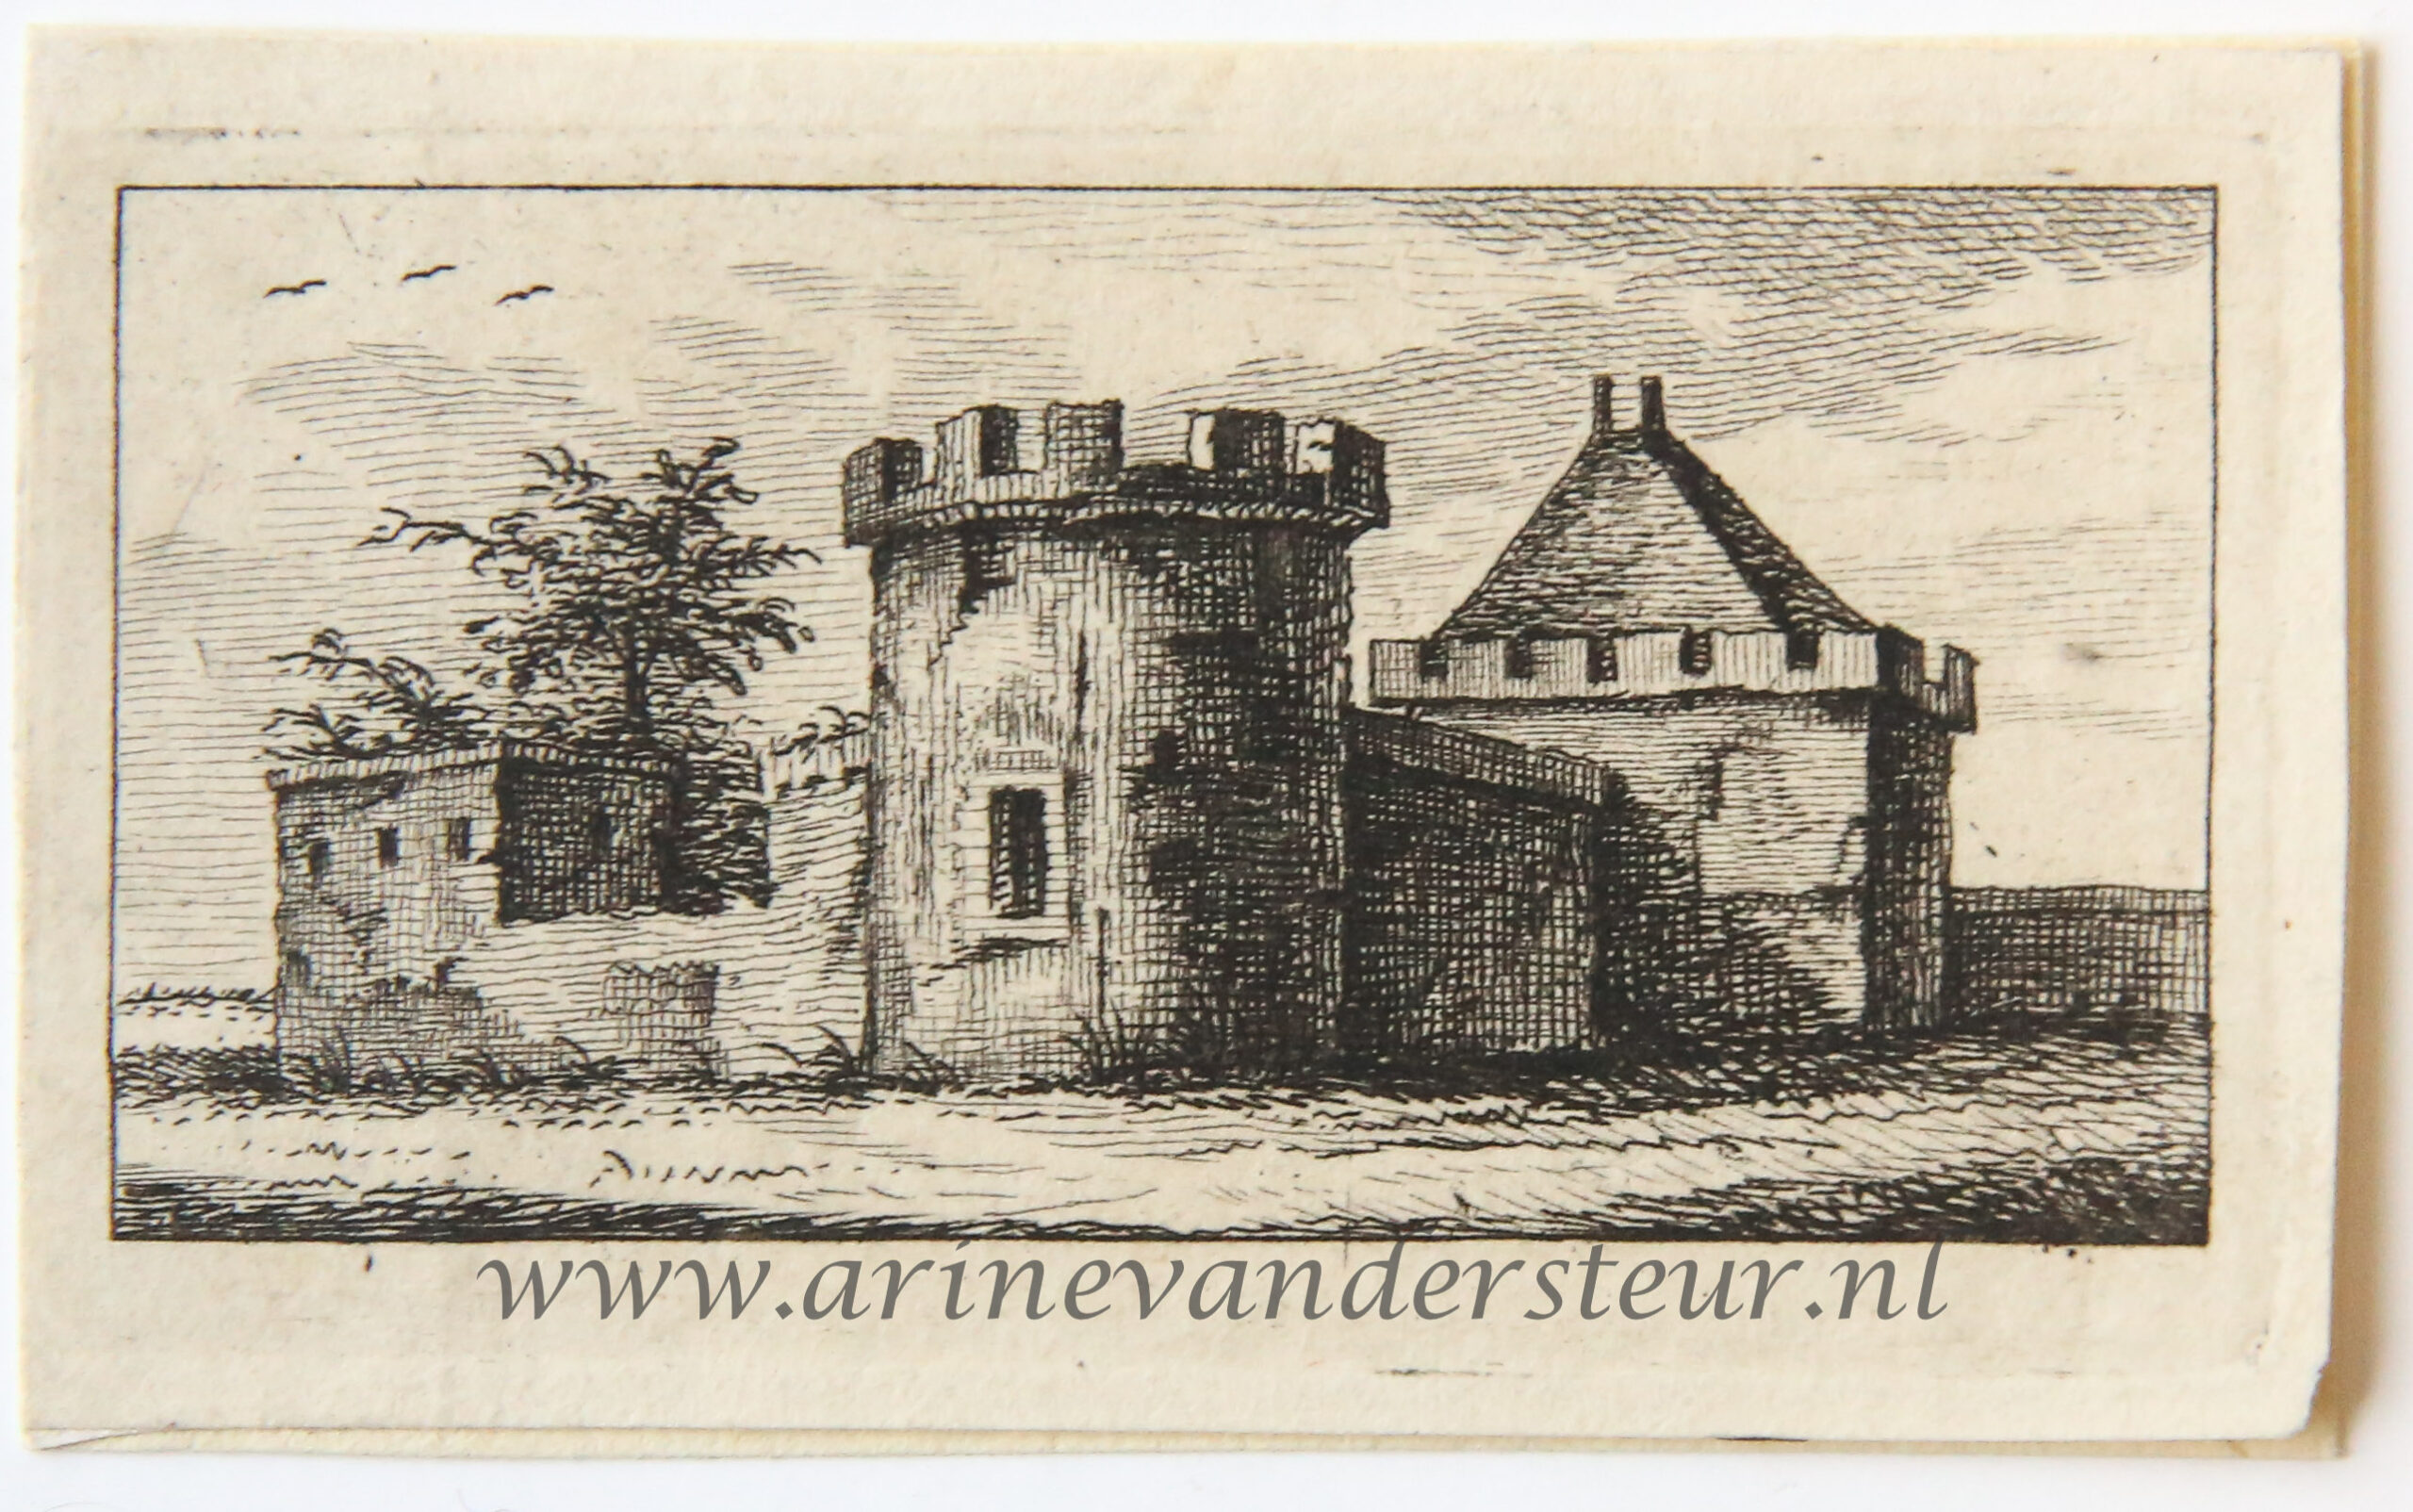 [Antique print, etching] View on a landscape with a fortified building, published 1766.